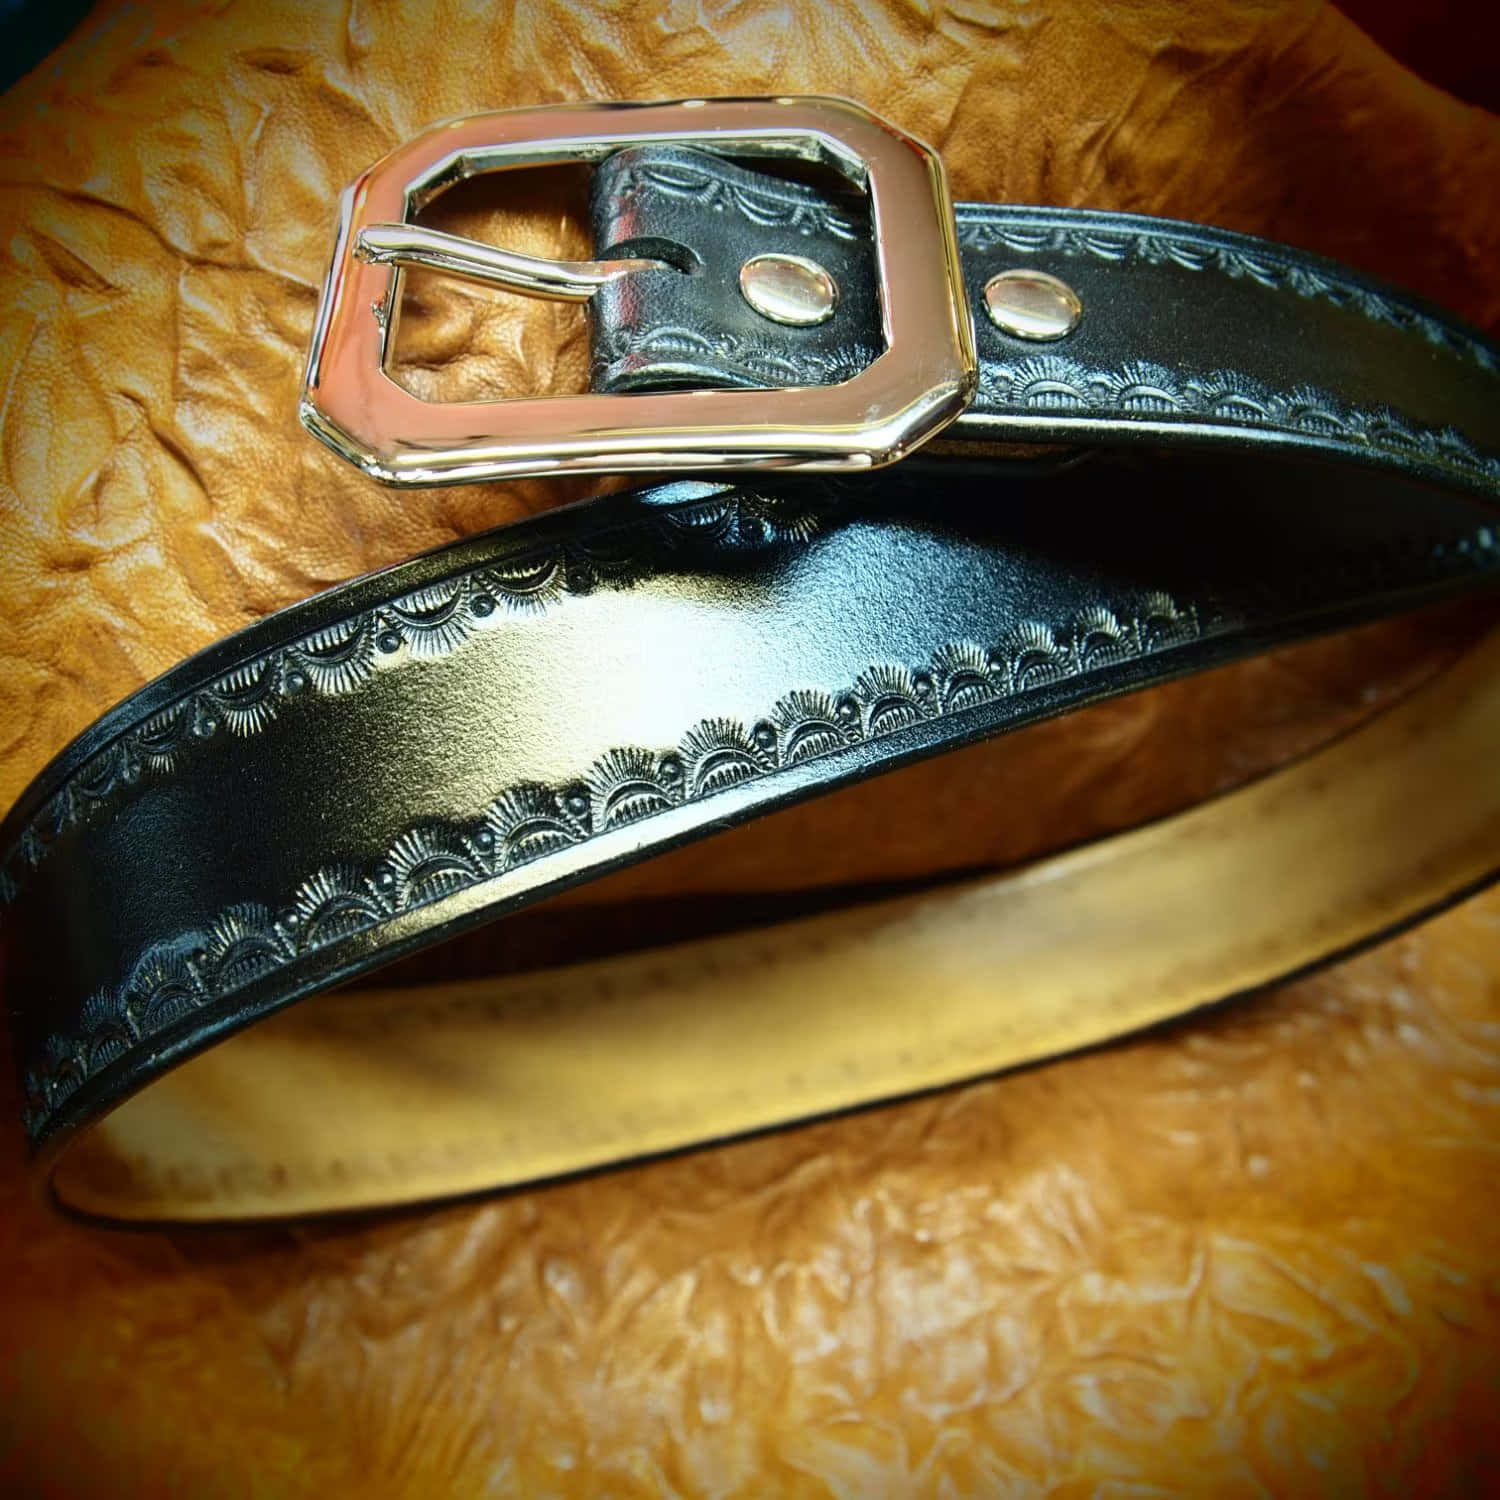 A Black Leather Belt With A Silver Buckle